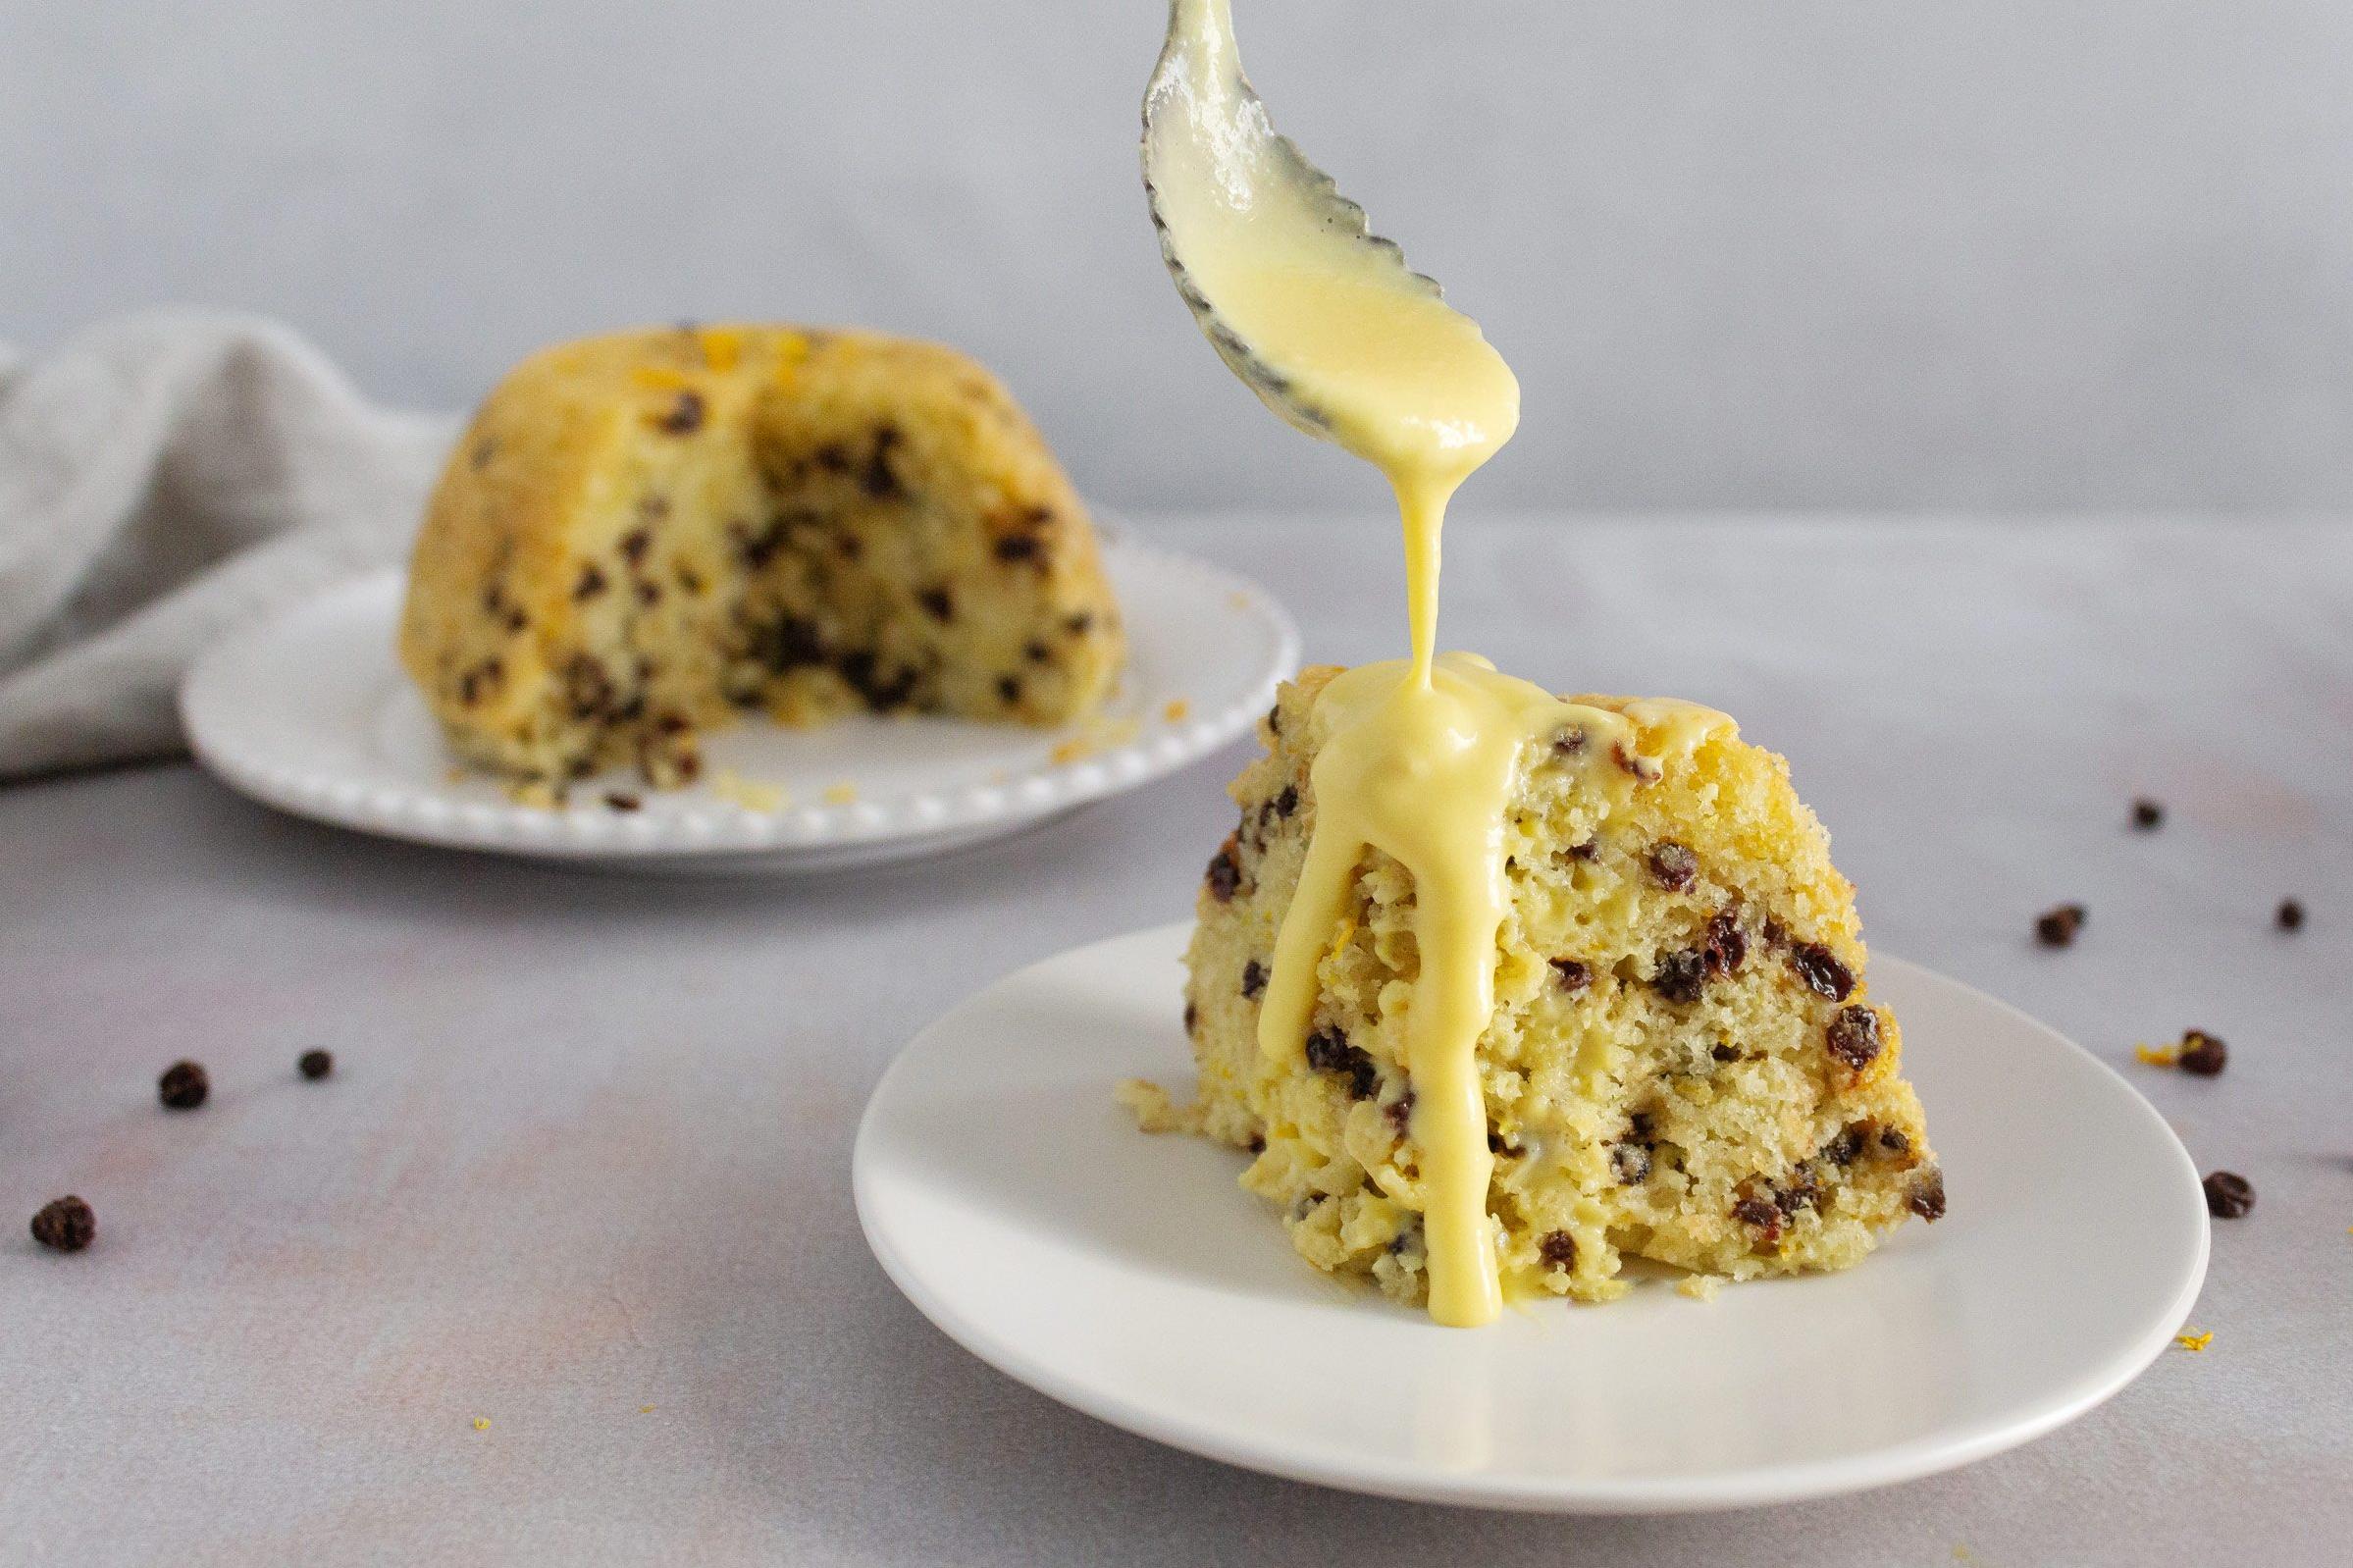  You won't miss the gluten in this instant pot spotted dick dessert!